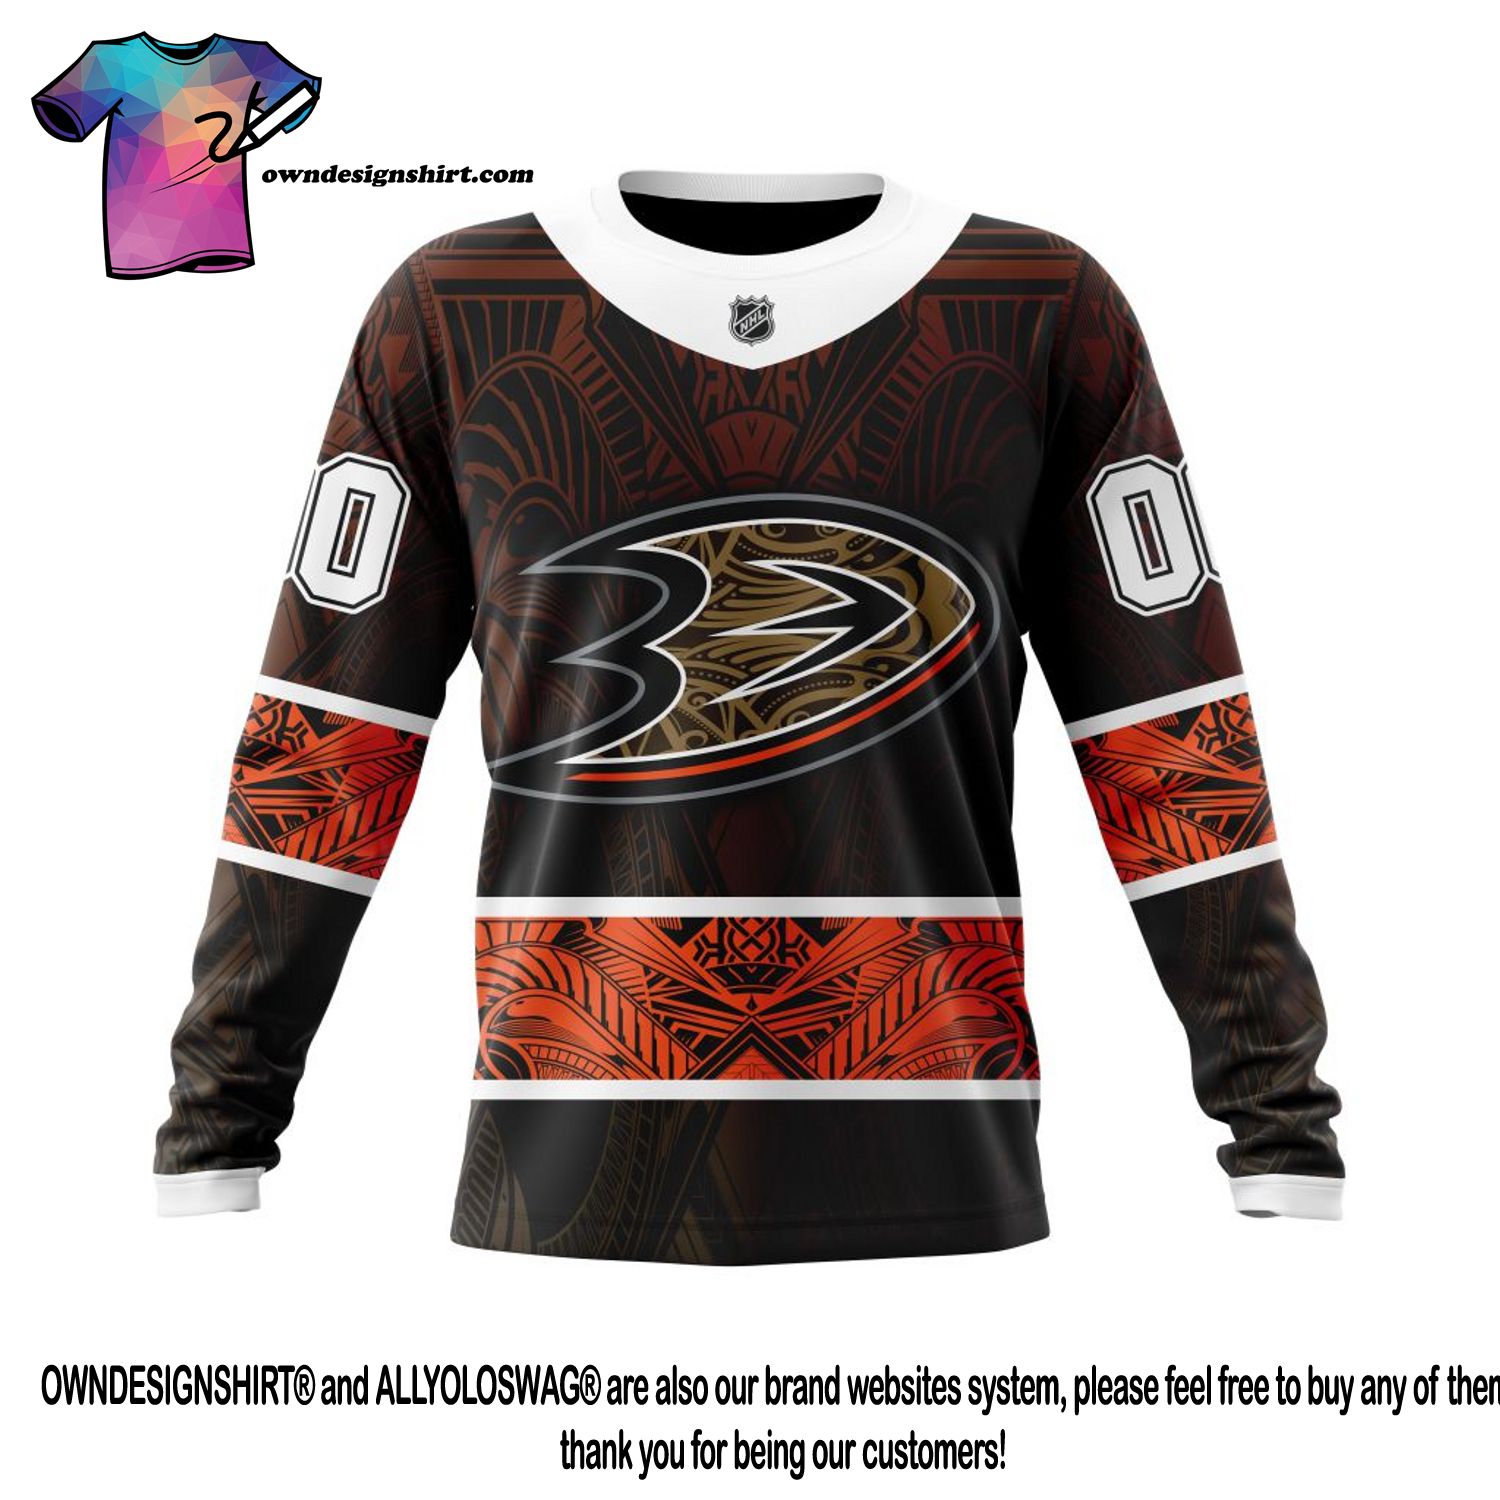 NHL Mighty Ducks Orange and Black Holiday Sweater in 2023